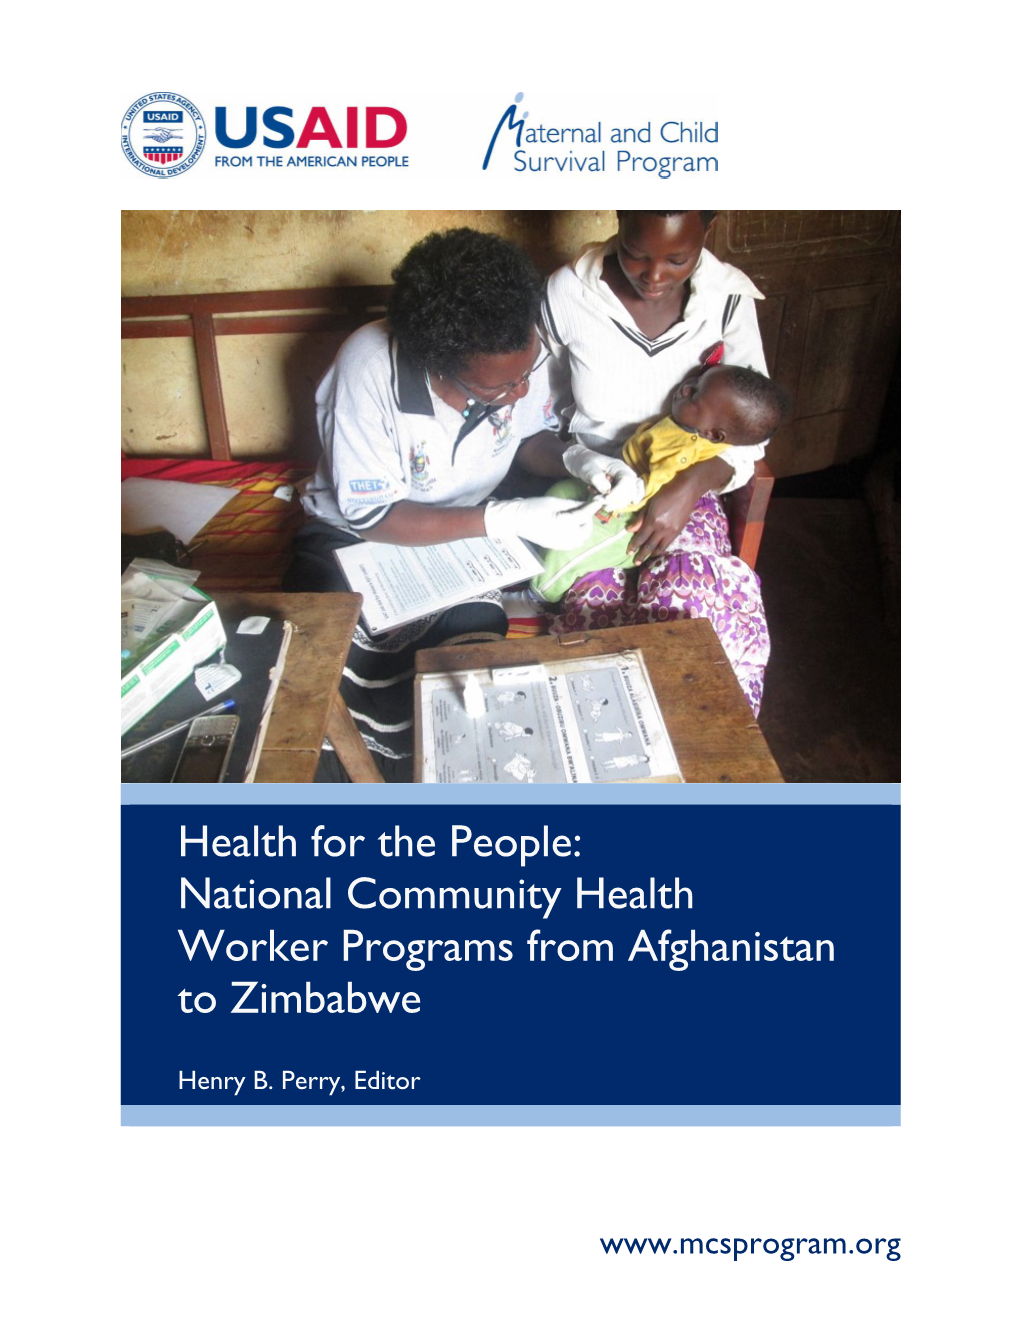 National Community Health Worker Programs from Afghanistan to Zimbabwe